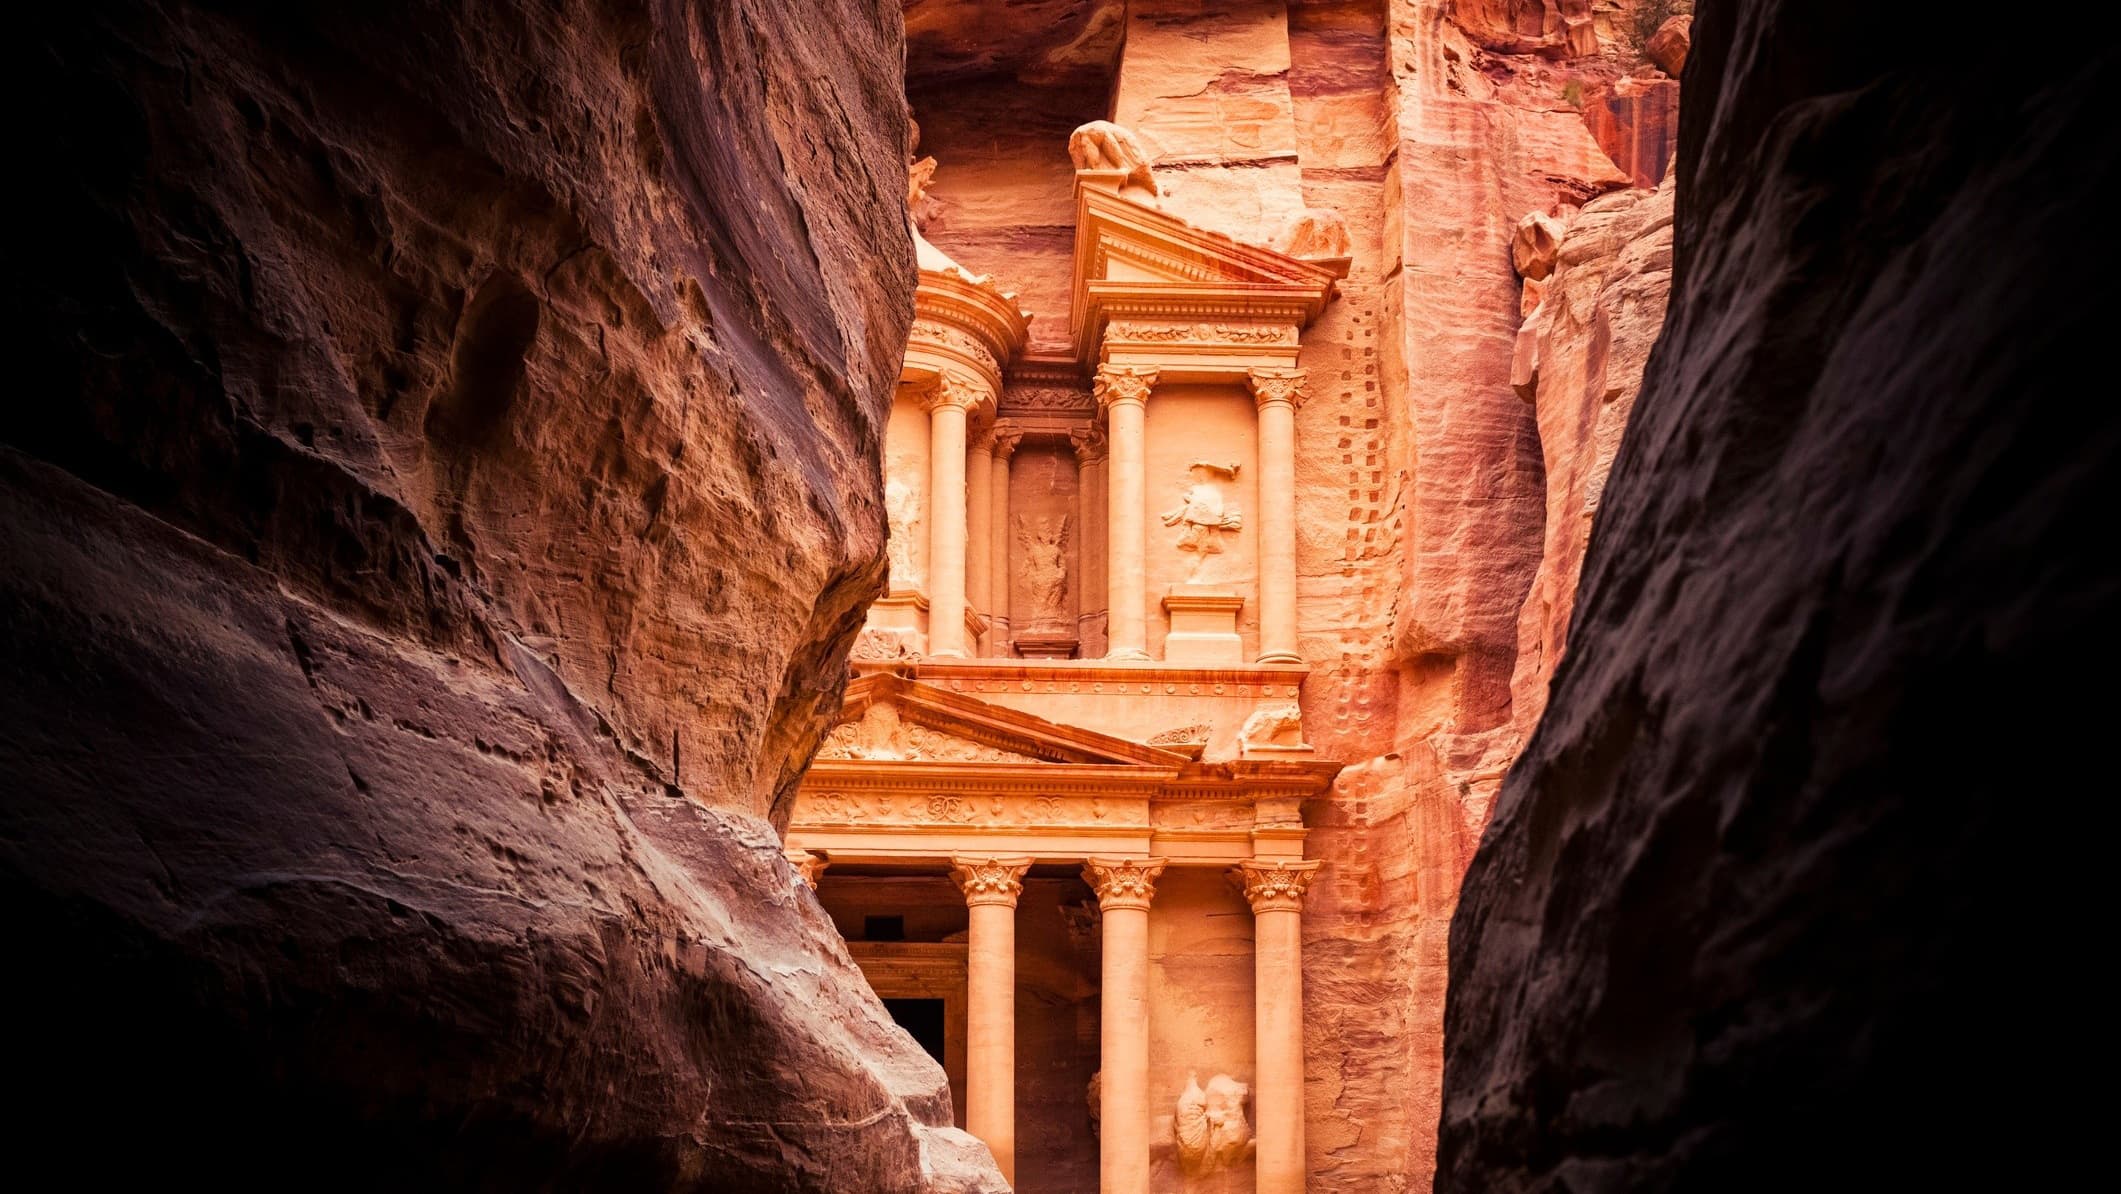 The rose-tinted treasury gates of Petra, an ancient city in Jordan. Photo: Getty